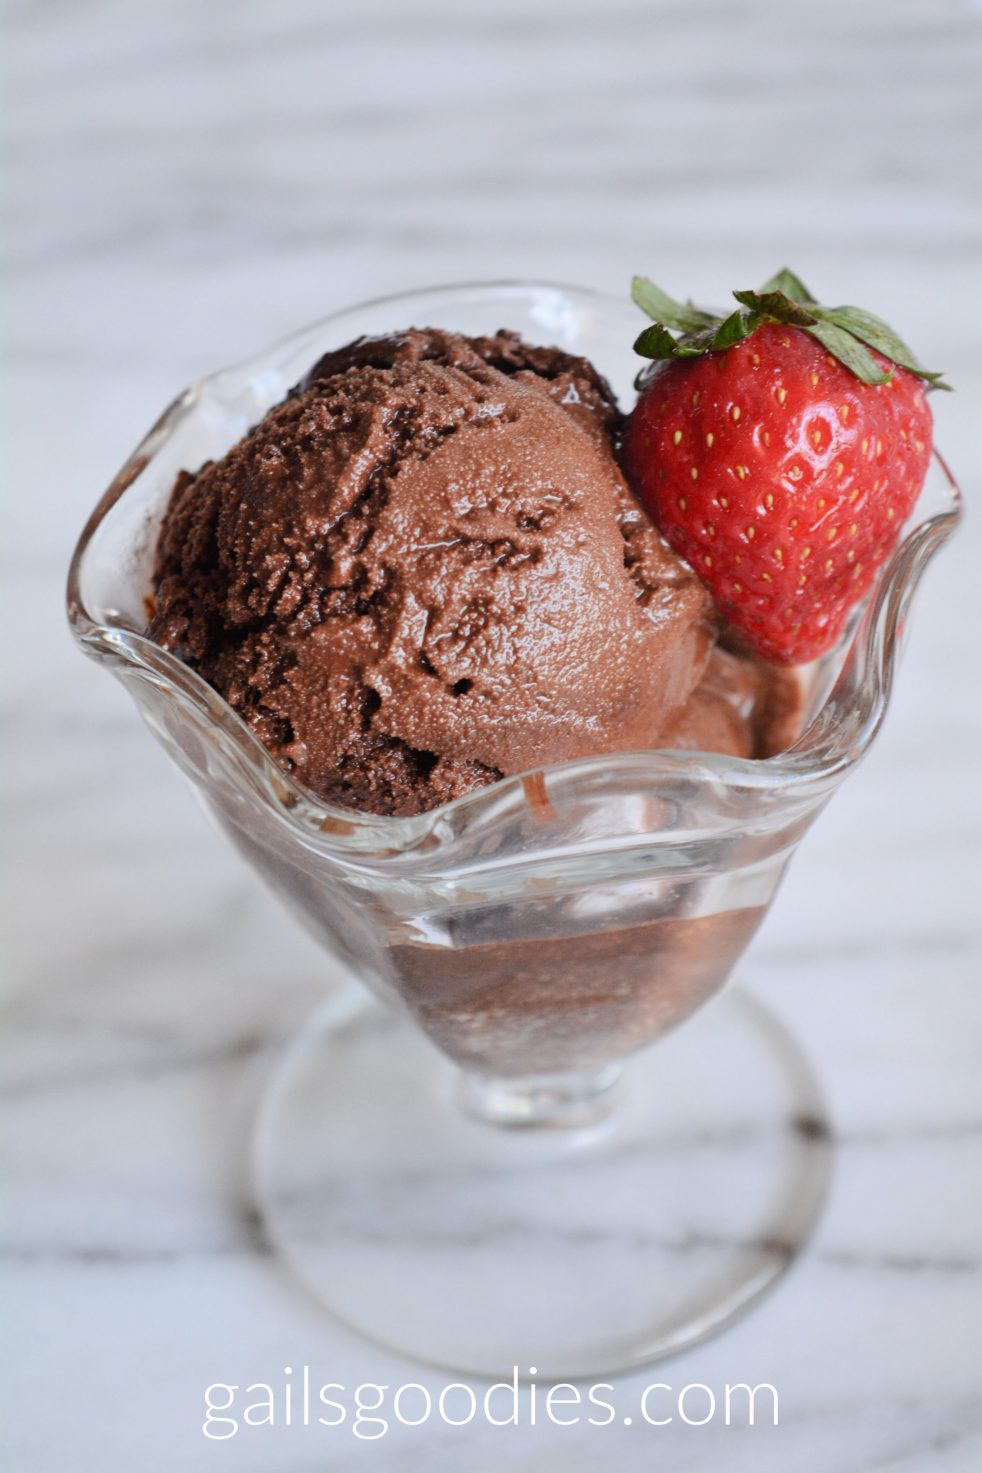 Scoops of chocolate sorbet in a sundae glass. The creamy dark chocolate sorbet is garnished with a single strawberry.